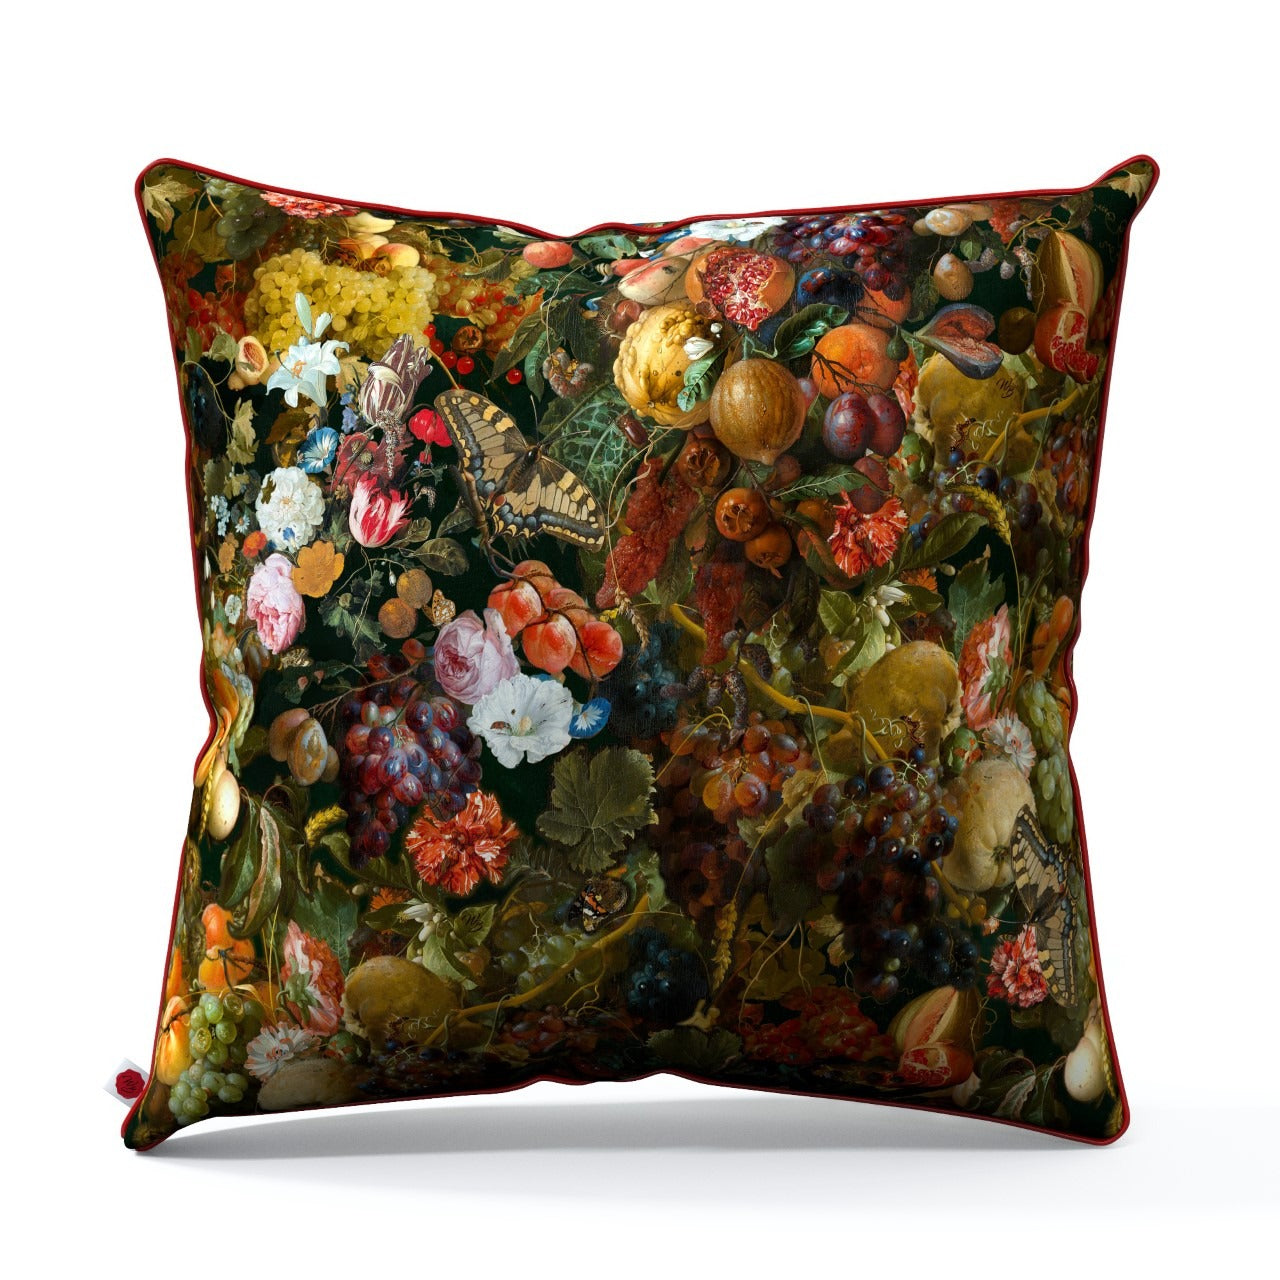 Garland of fruits and flowers pillow 50 x 50 cm